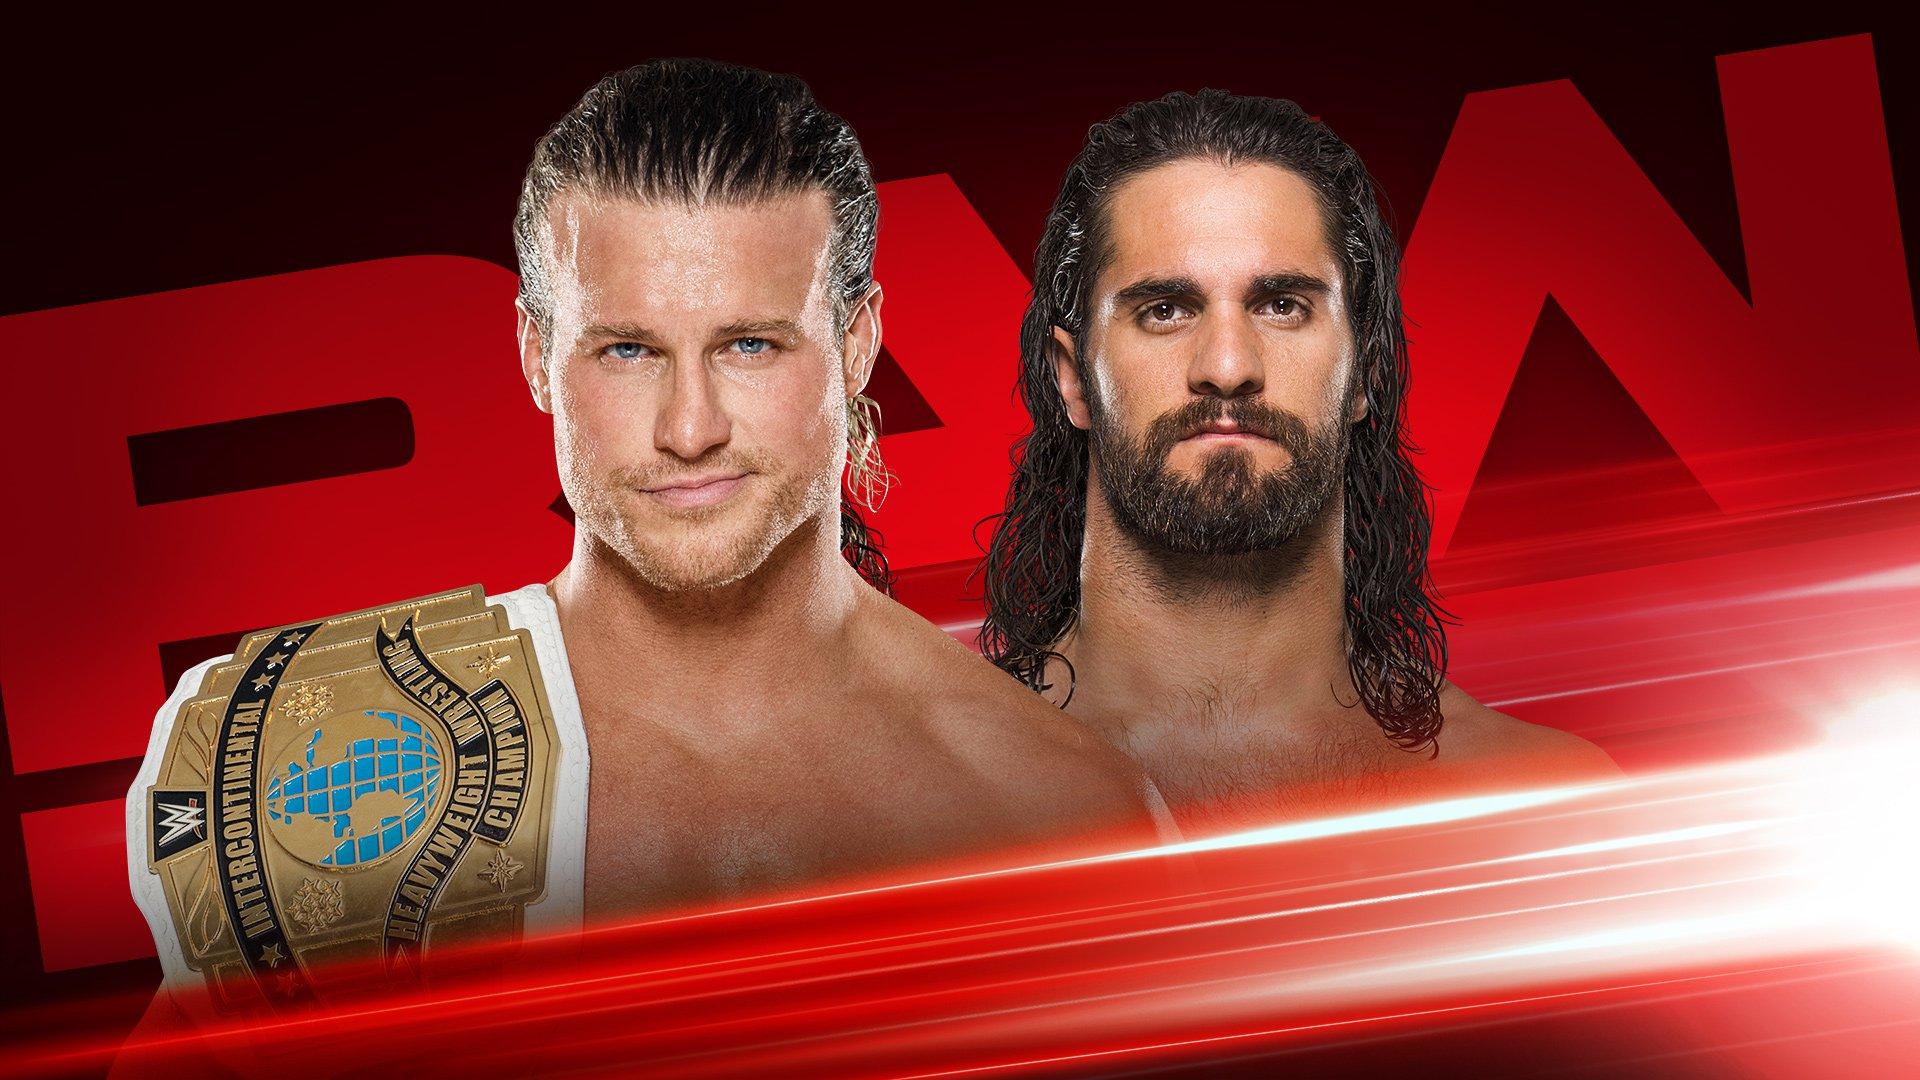 What You Can Expect To See On Tonight's Episode of WWE Monday Night RAW